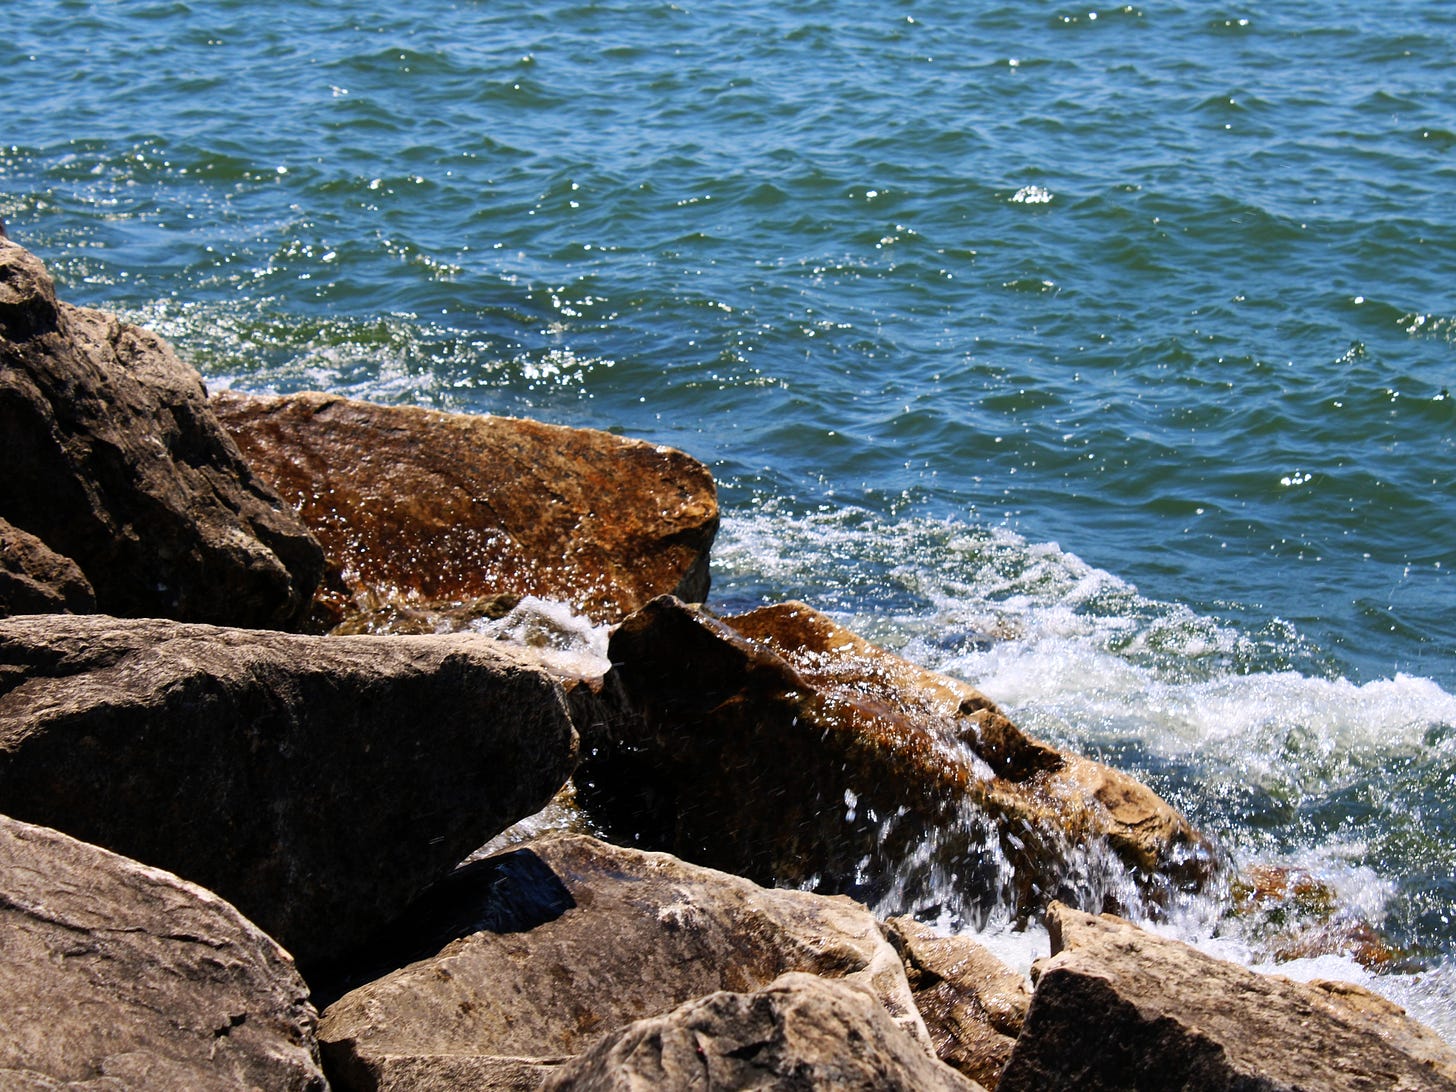 A photograph of brownish gray rocks in the foreground with foamy Lake Michigan water breaking on them in the midground.